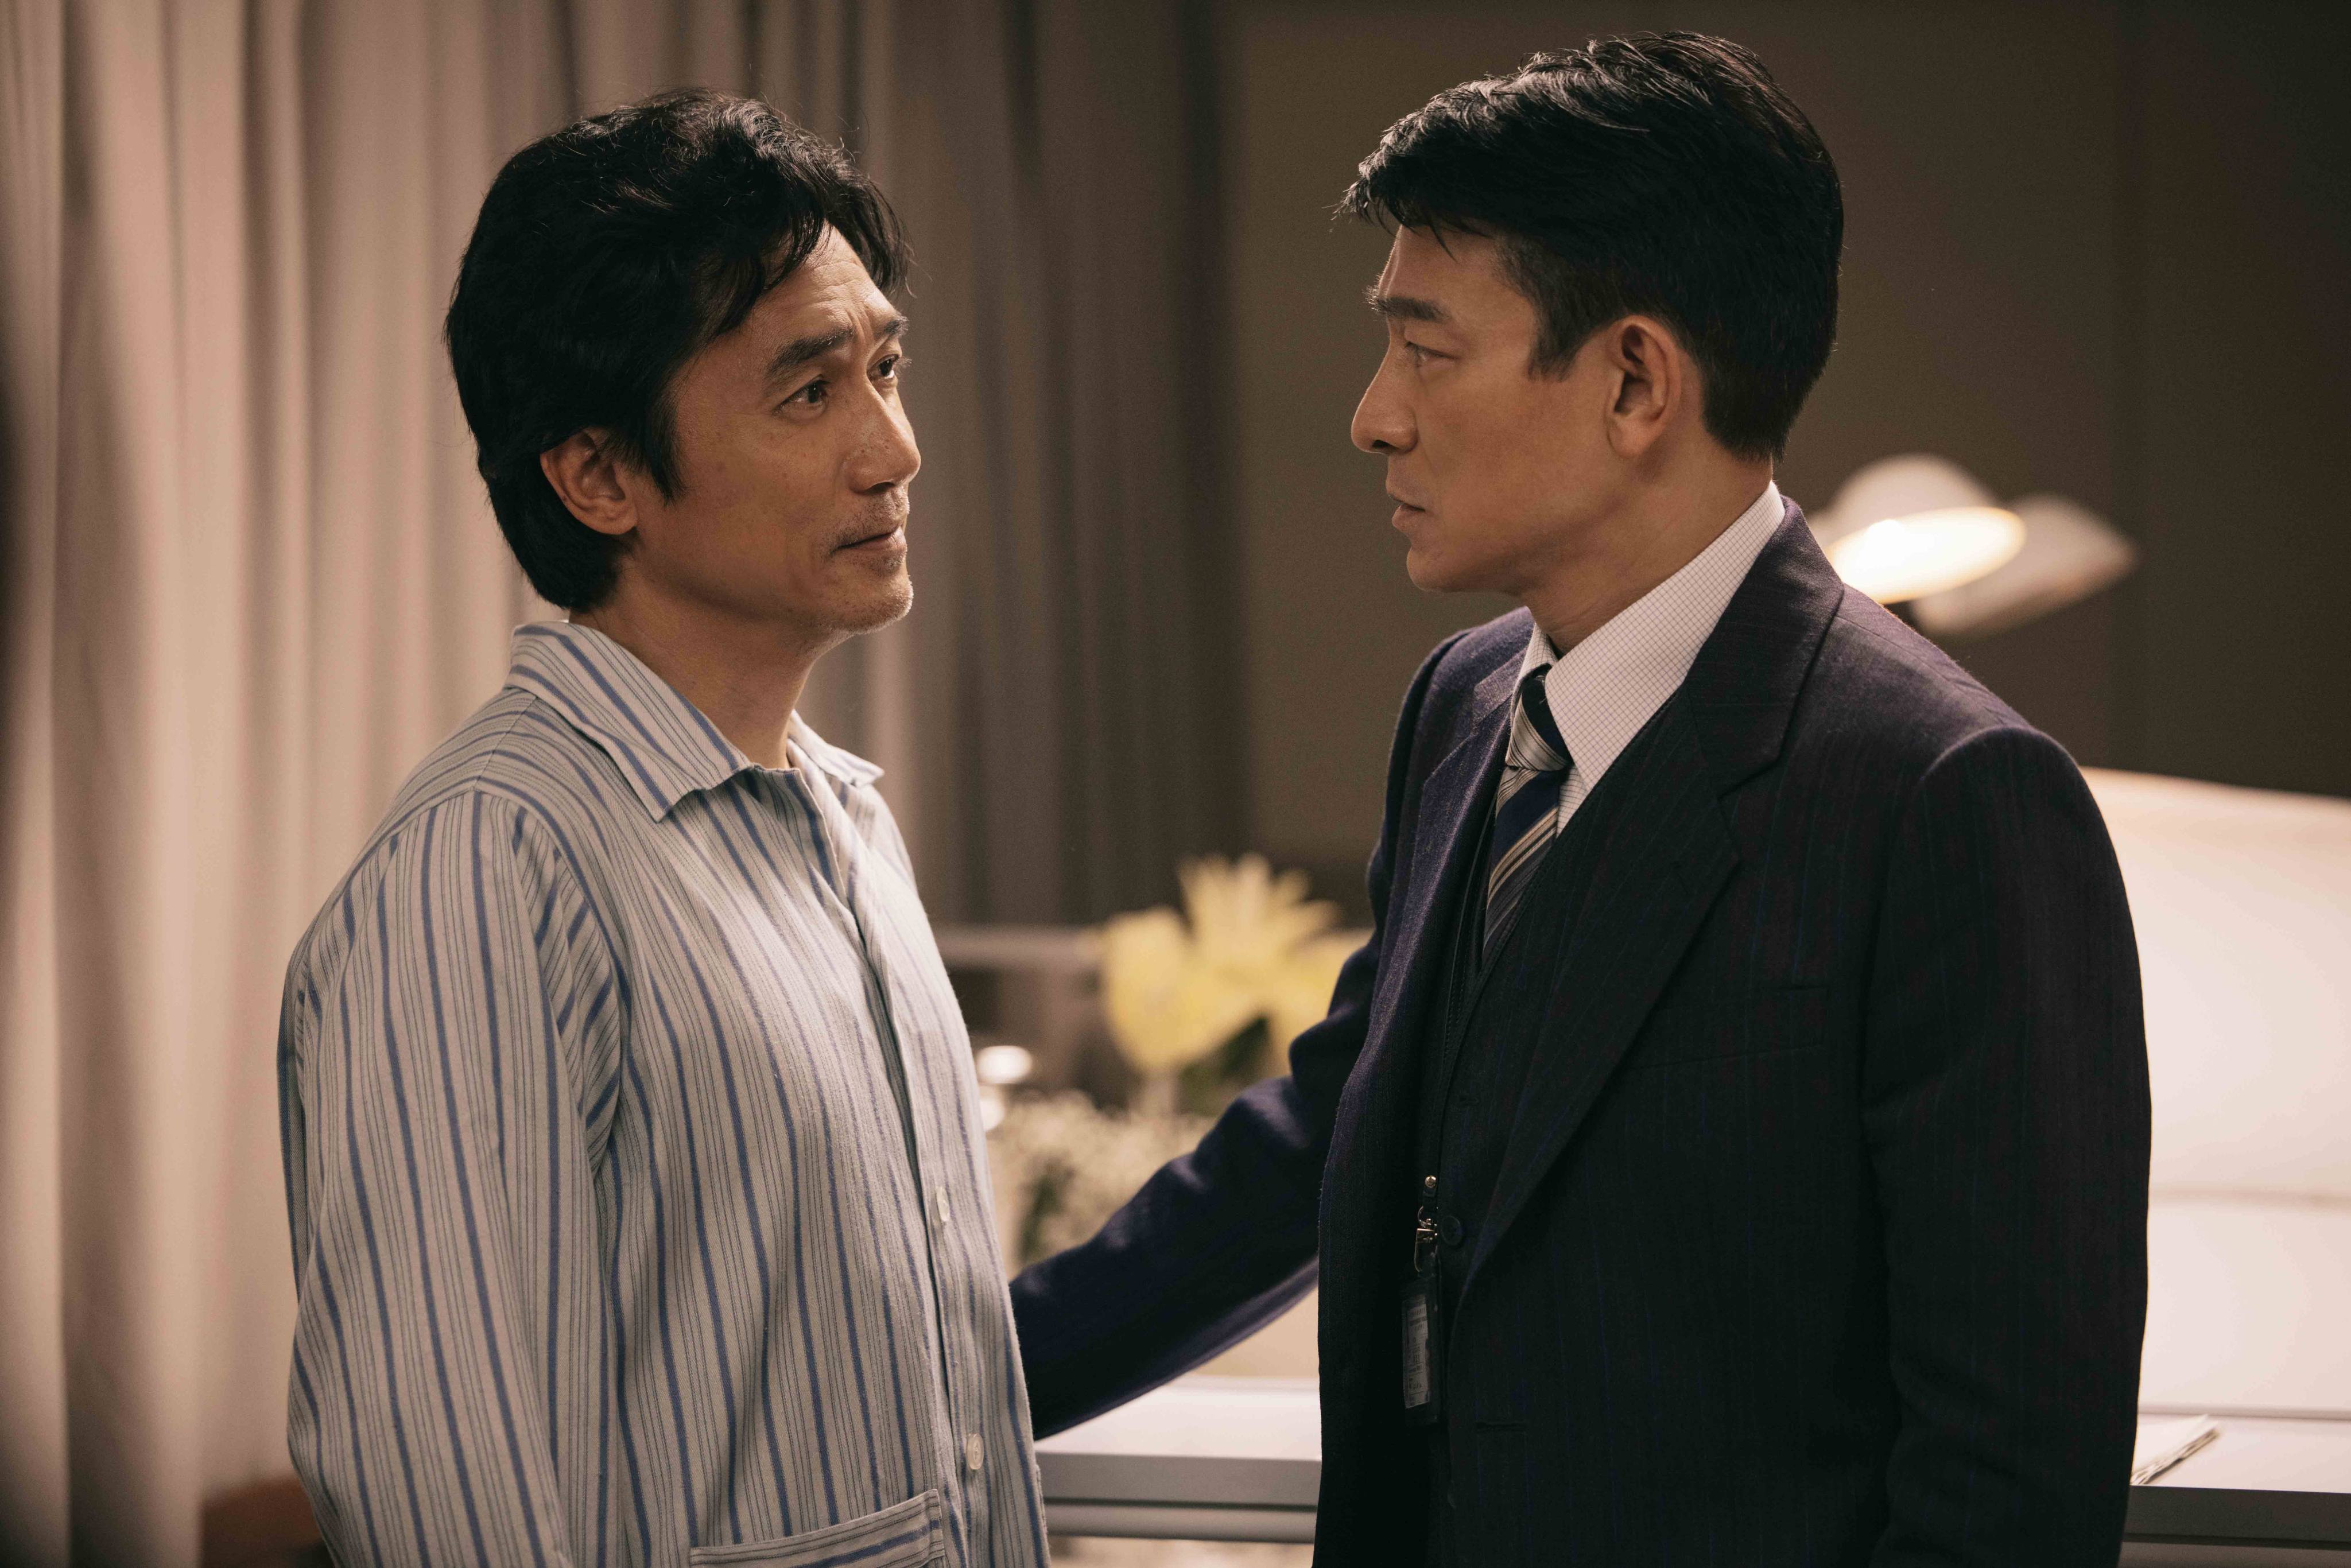 Tony Leung Chiu-wai (left) and Andy Lau Tak-wah in a still from “The Goldfinger”.